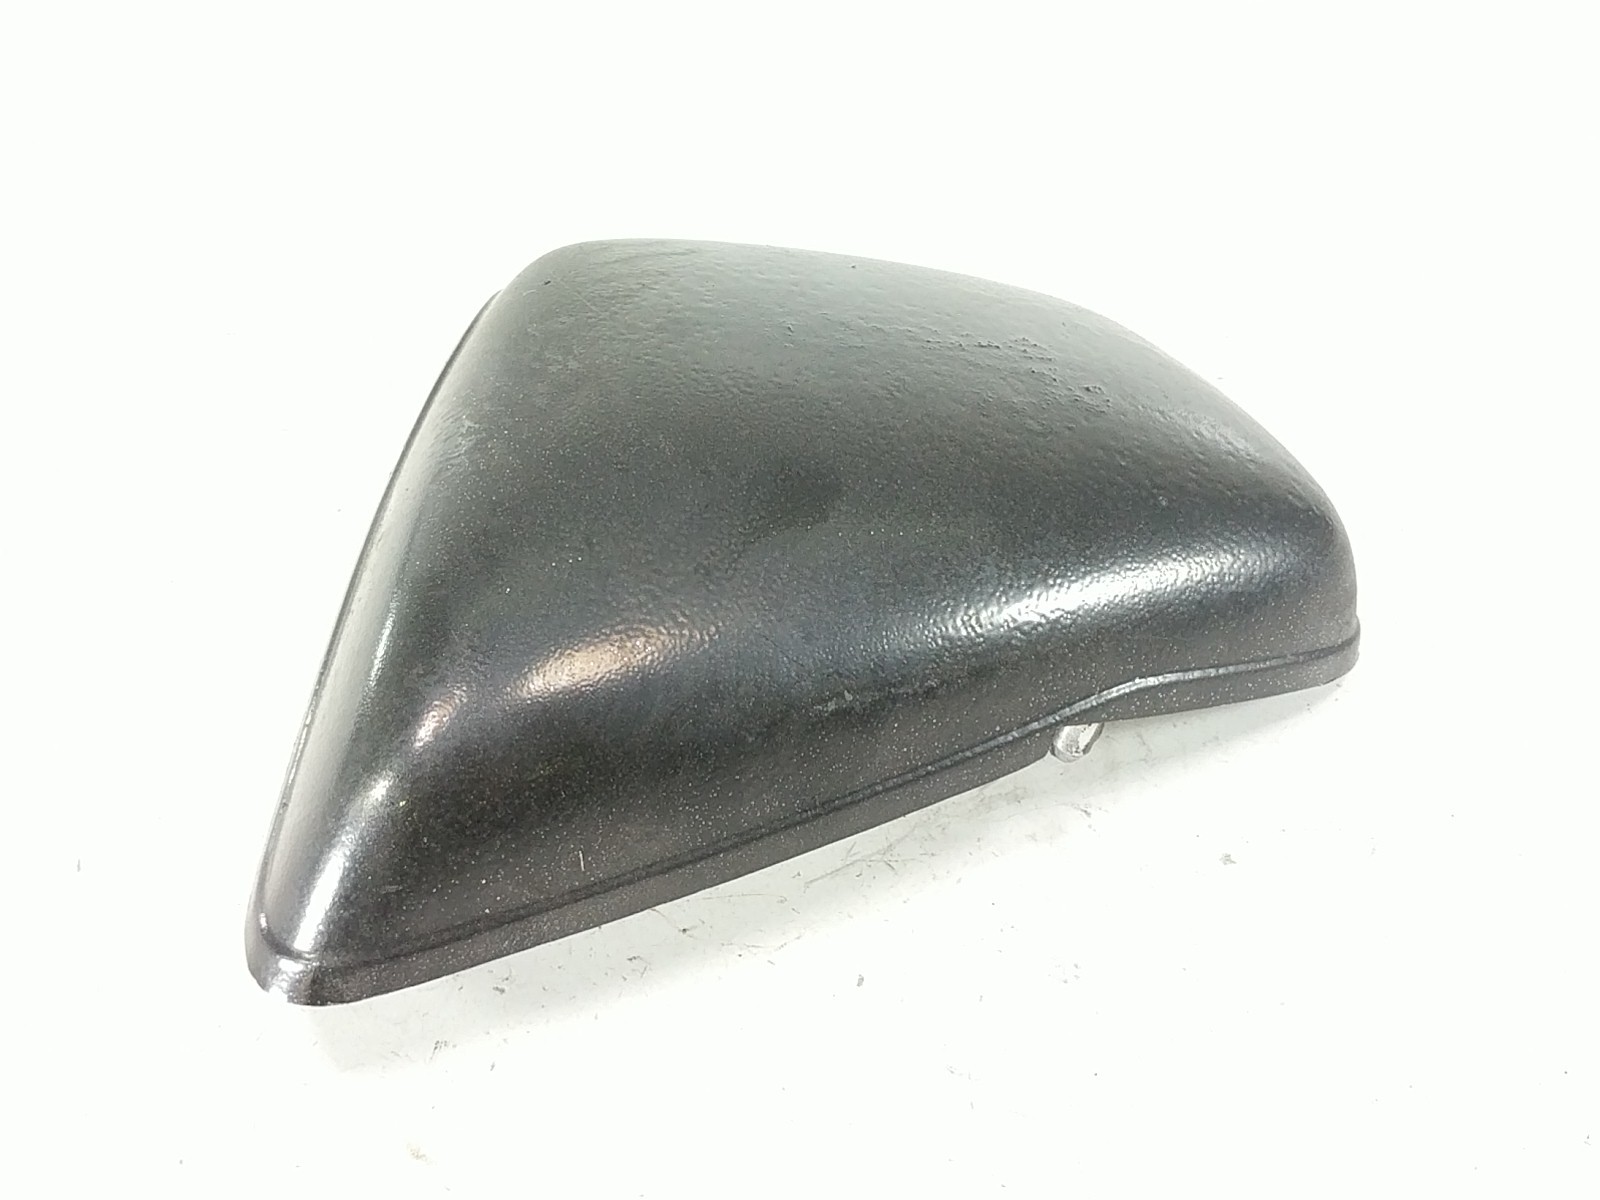 89  Yamaha  Virago  XV  1100  Right  Side  Cover  Lower  Seat  Panel  42X-21721-00